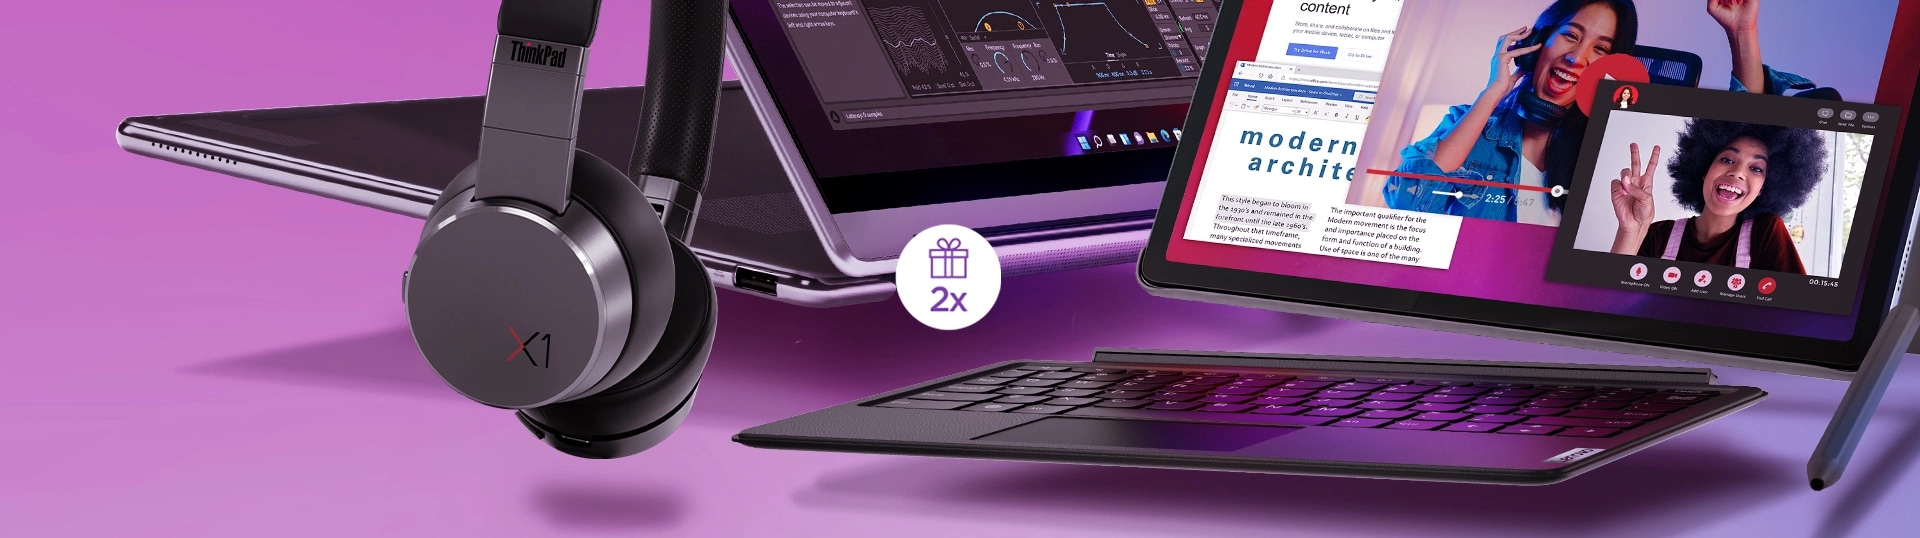 A Lenovo ThinkPad X1 headphone, a Lenovo laptop and Lenovo Tablet with it's keyboard detached and it's pen, and a 2X and gift My Lenovo Rewards Icon.